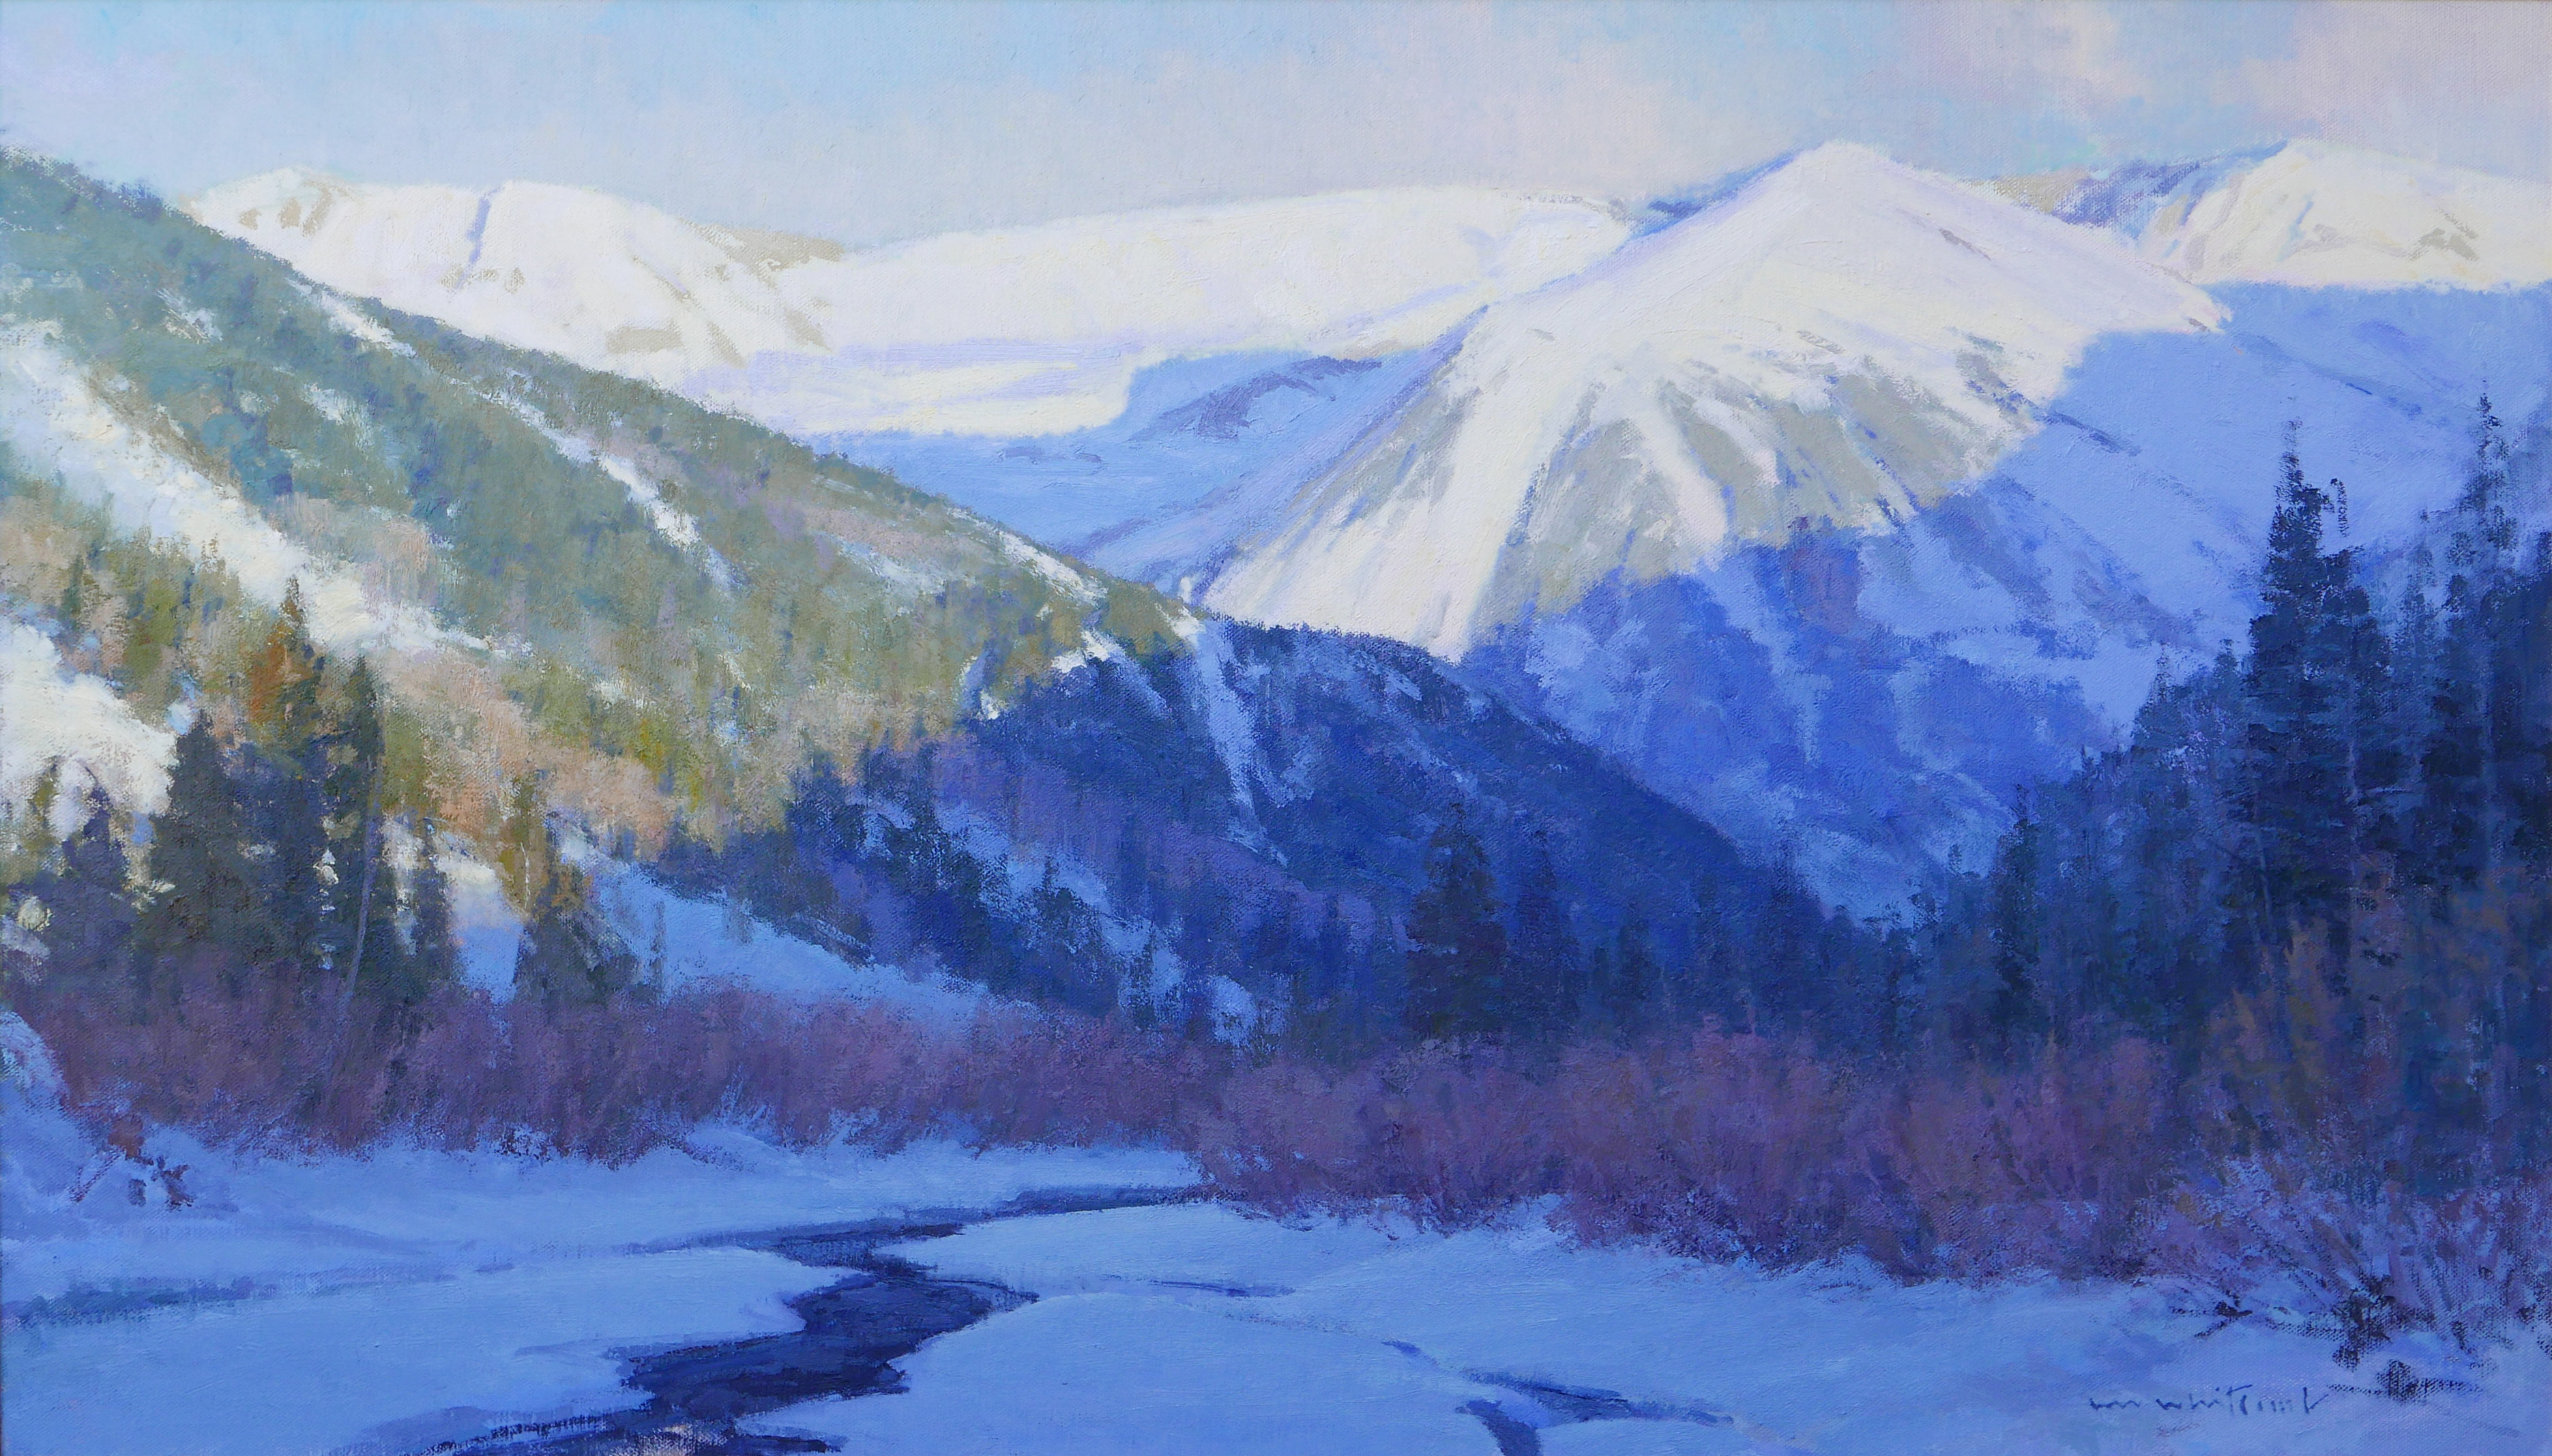 Winter Vespers by Skip Whitcomb 28 high X 48 wide $24,000.00